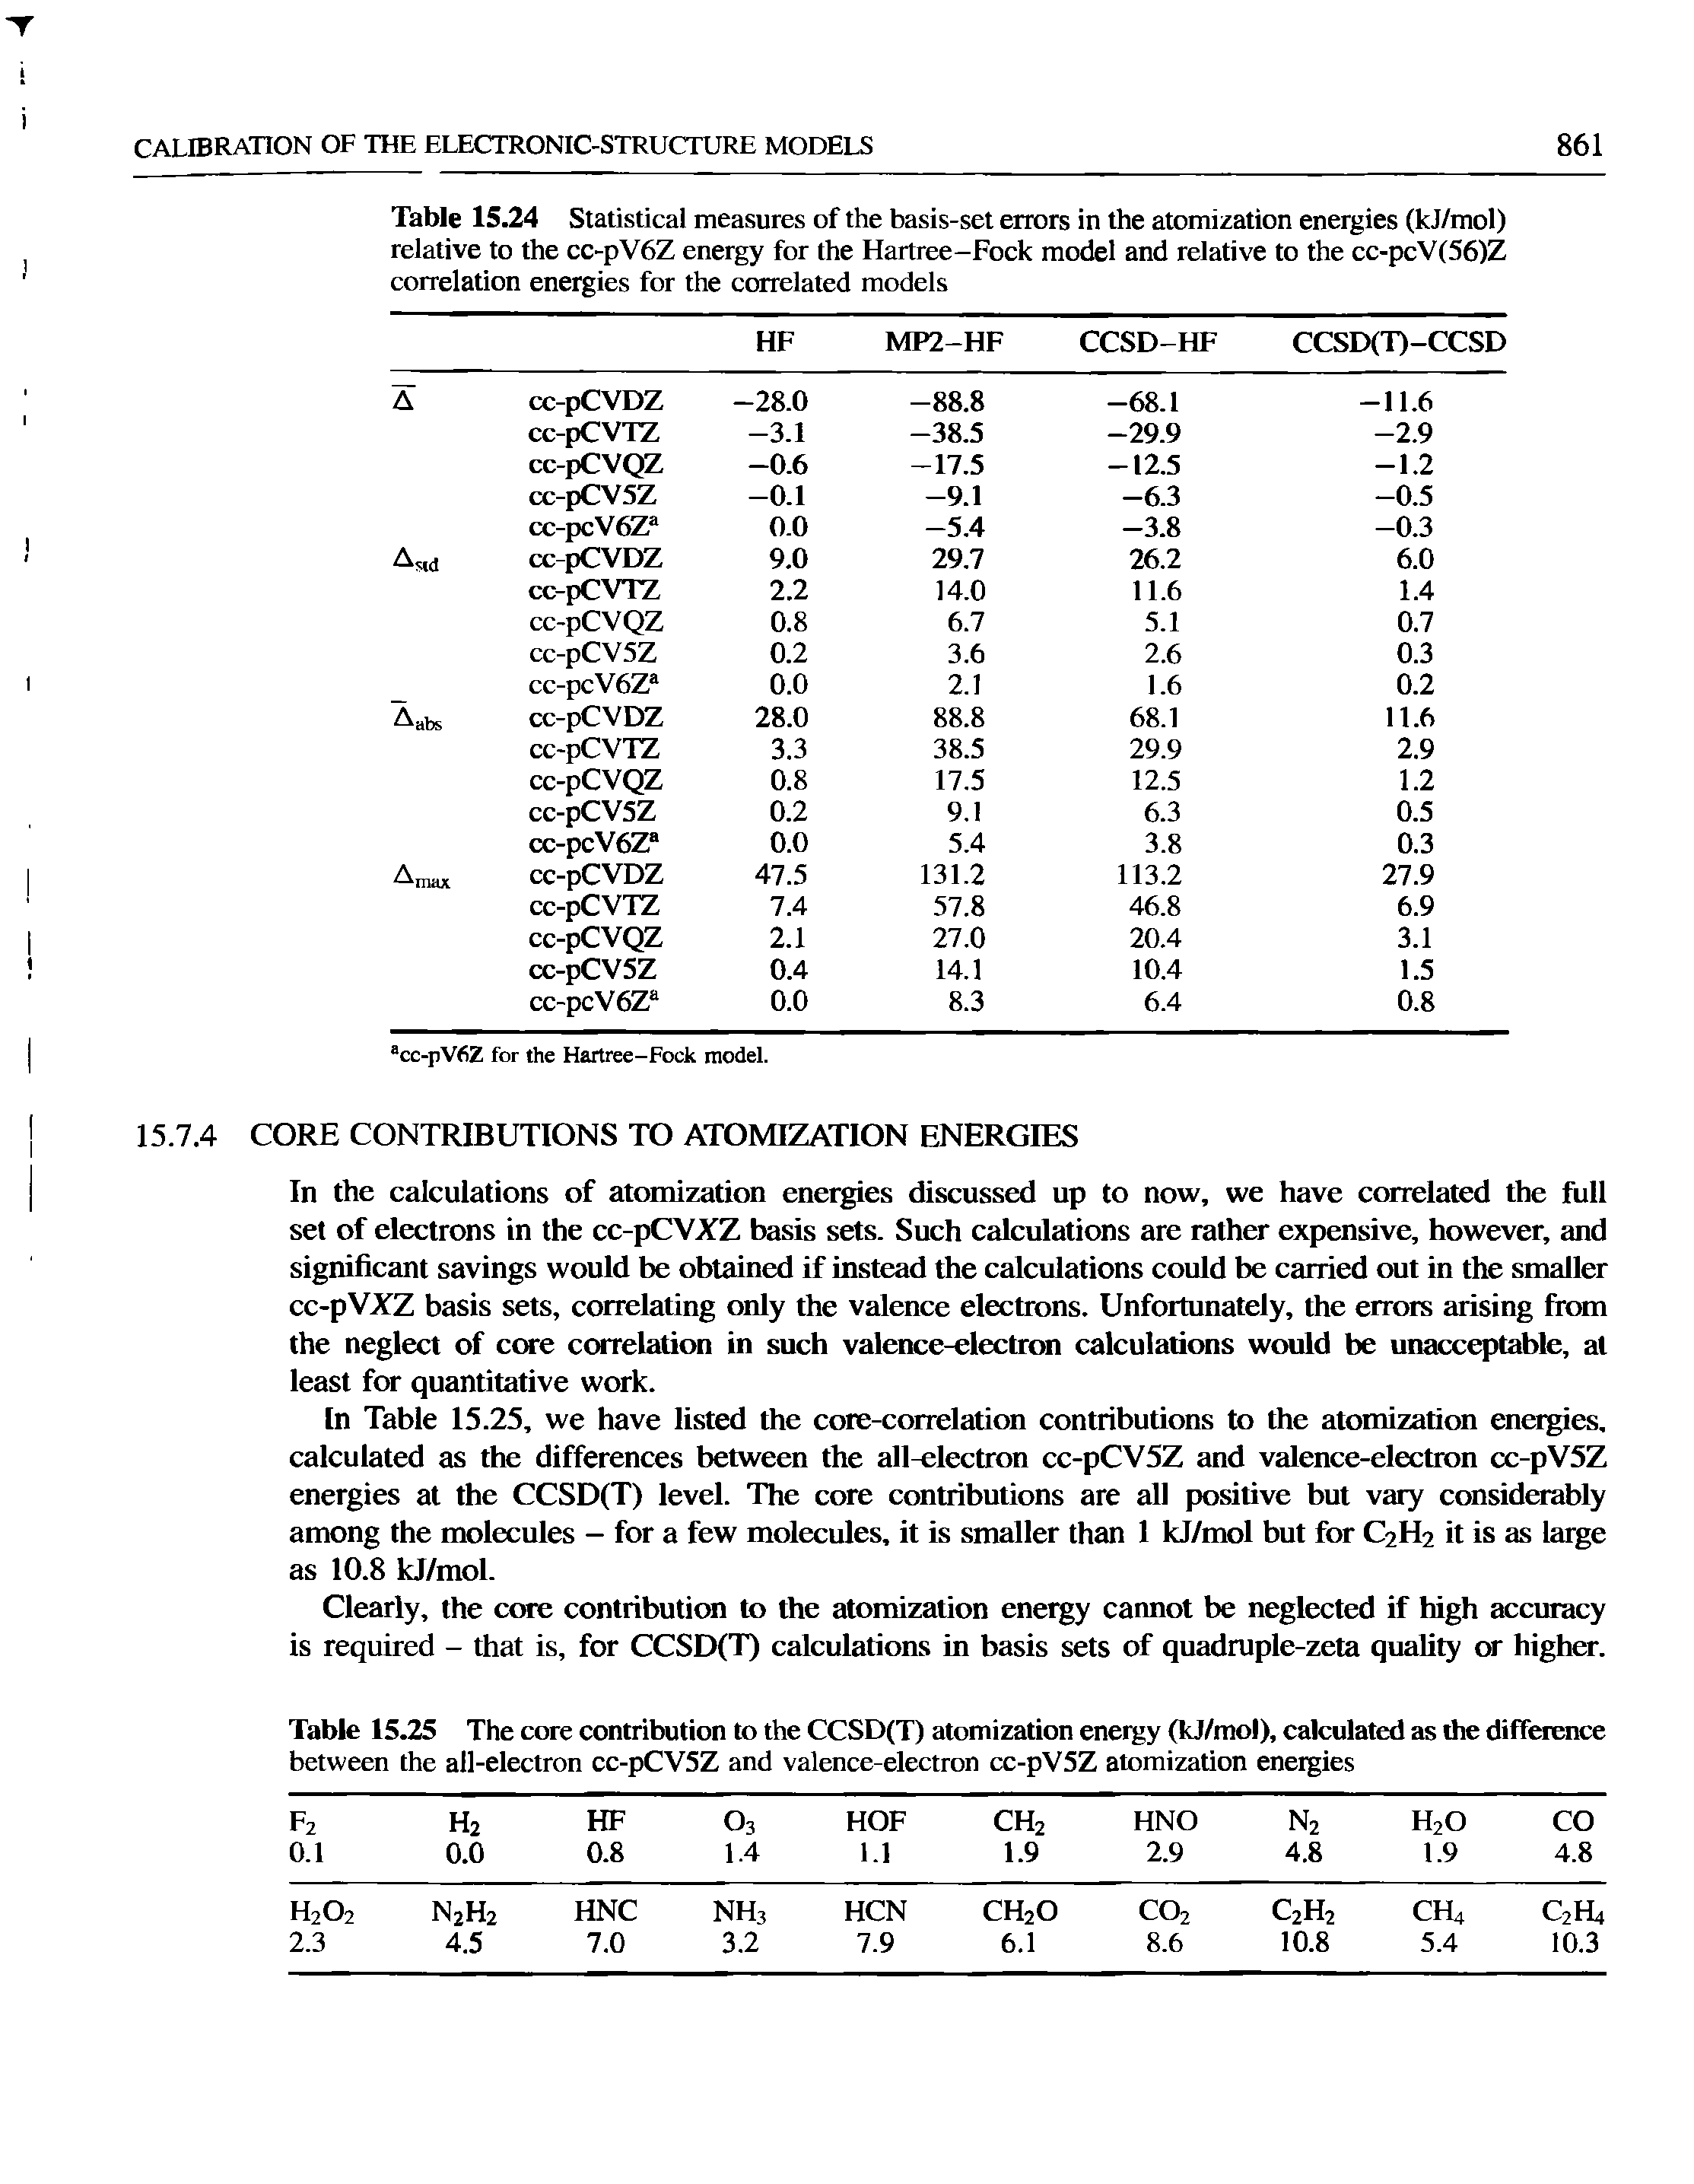 Table 15 Statistical measures of the basis-set errors in the atomization energies (kJ/moI) relative to the cc-pV6Z energy for the Hartree-Fock model and relative to the cc-pcV(56)Z correlation energies for the correlated models...